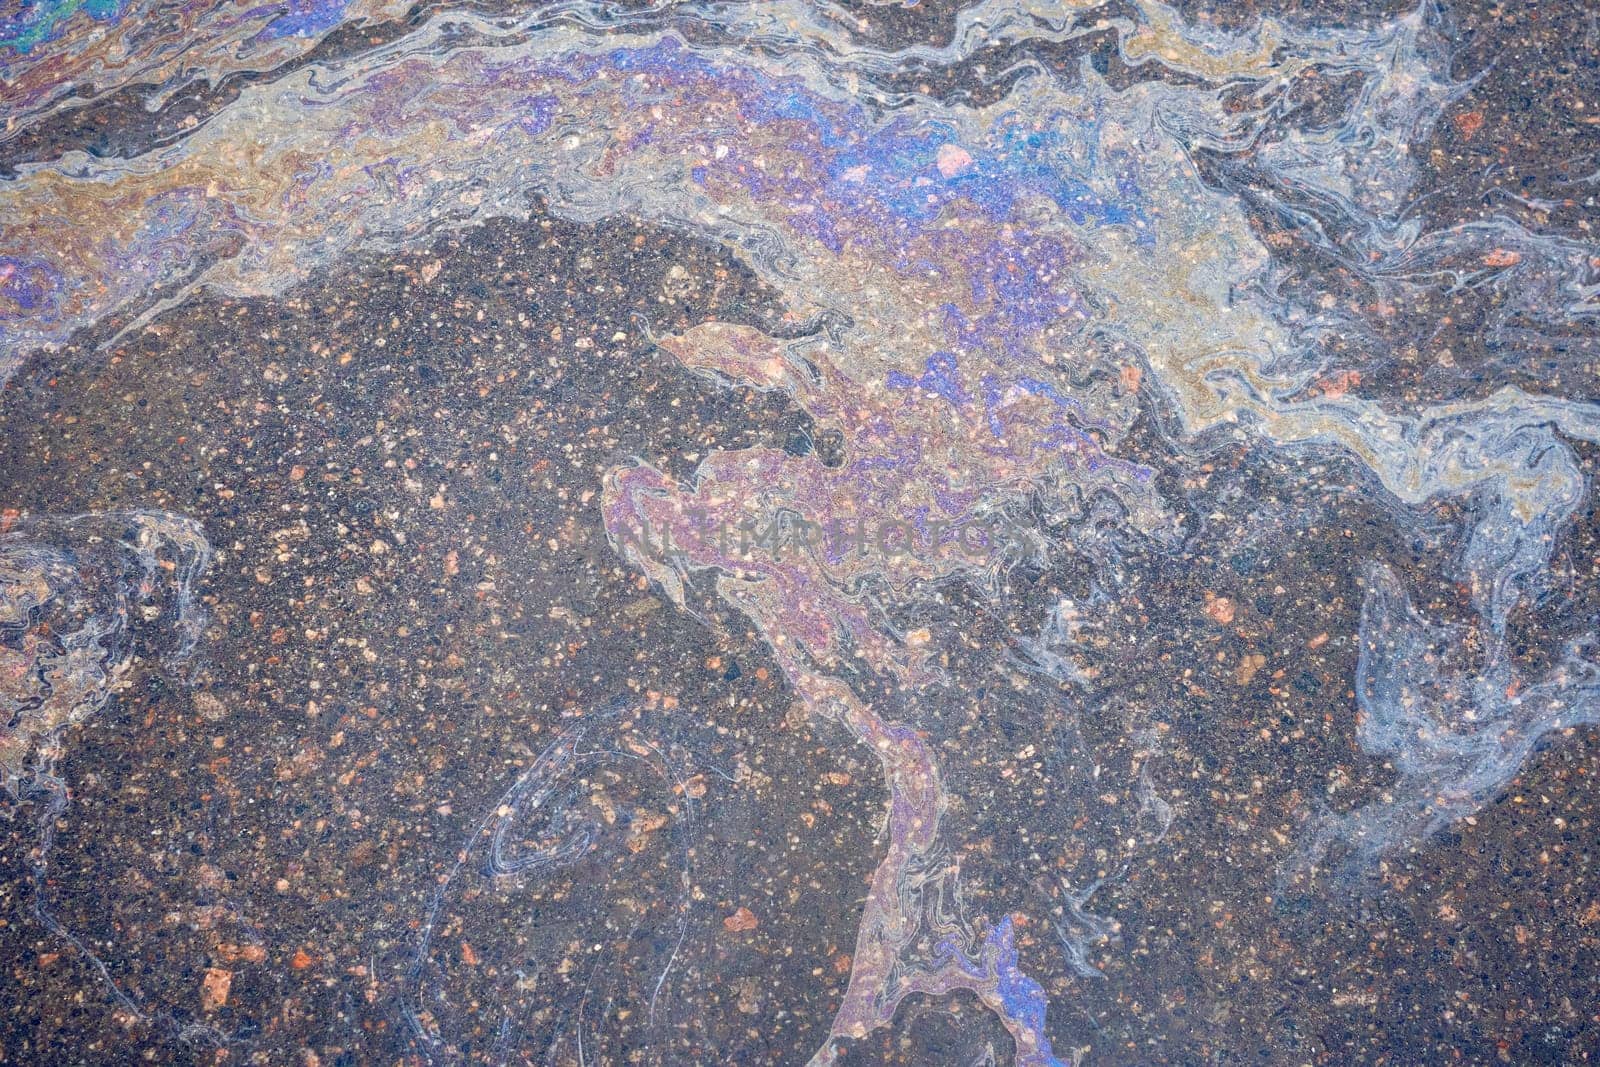 Oil residues on wet asphalt interact with sunlight, displaying a rainbow-like spectrum of colors. by AliaksandrFilimonau